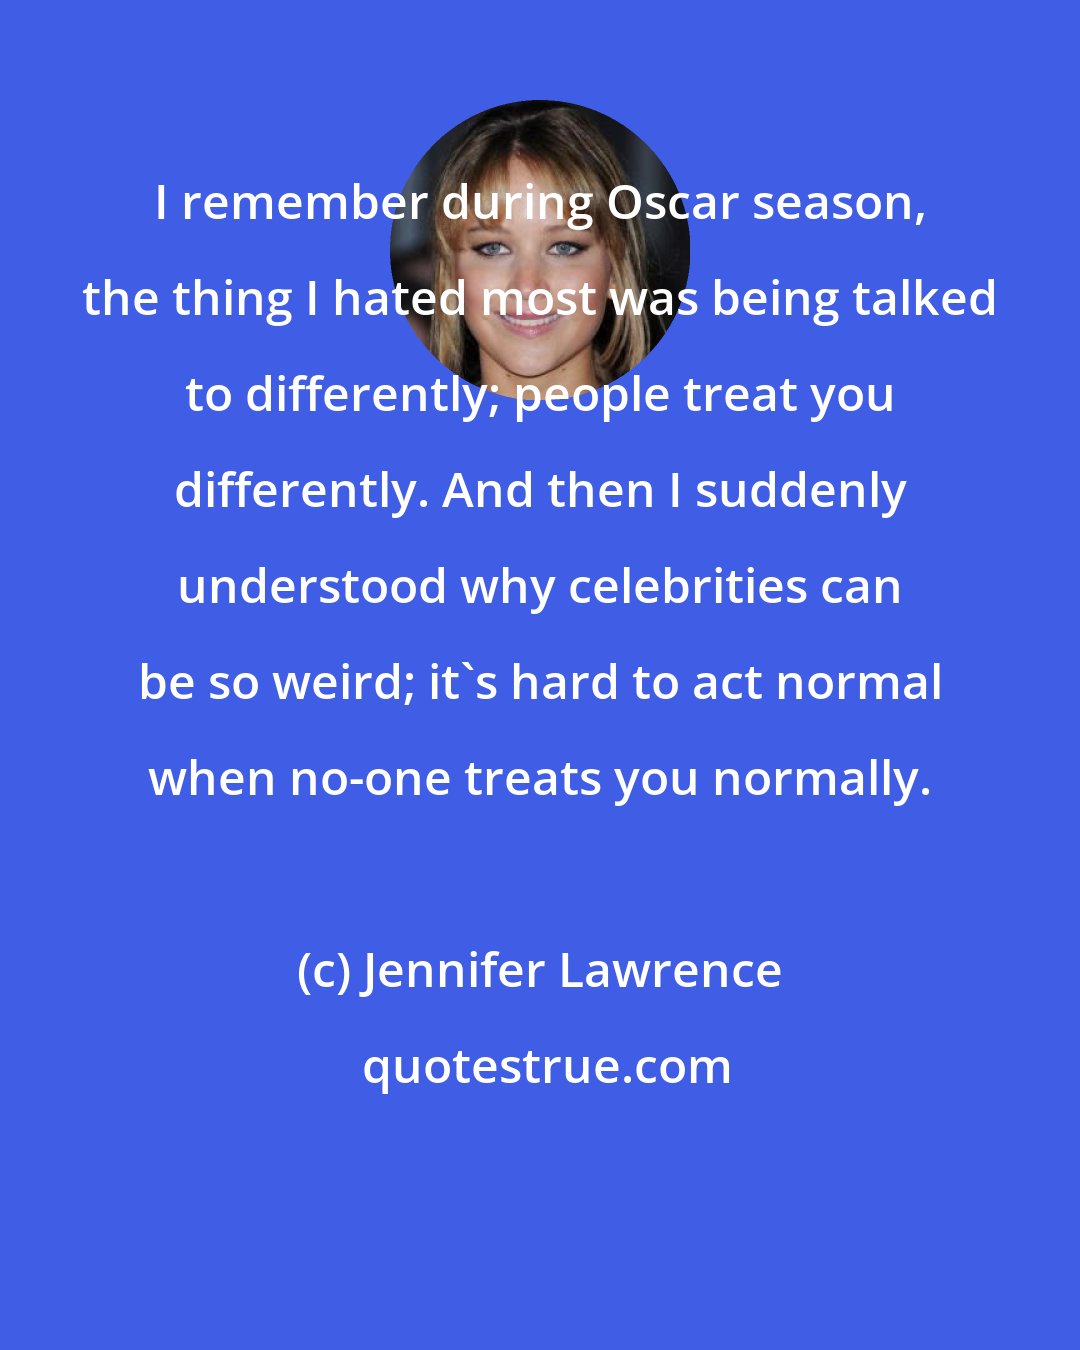 Jennifer Lawrence: I remember during Oscar season, the thing I hated most was being talked to differently; people treat you differently. And then I suddenly understood why celebrities can be so weird; it's hard to act normal when no-one treats you normally.